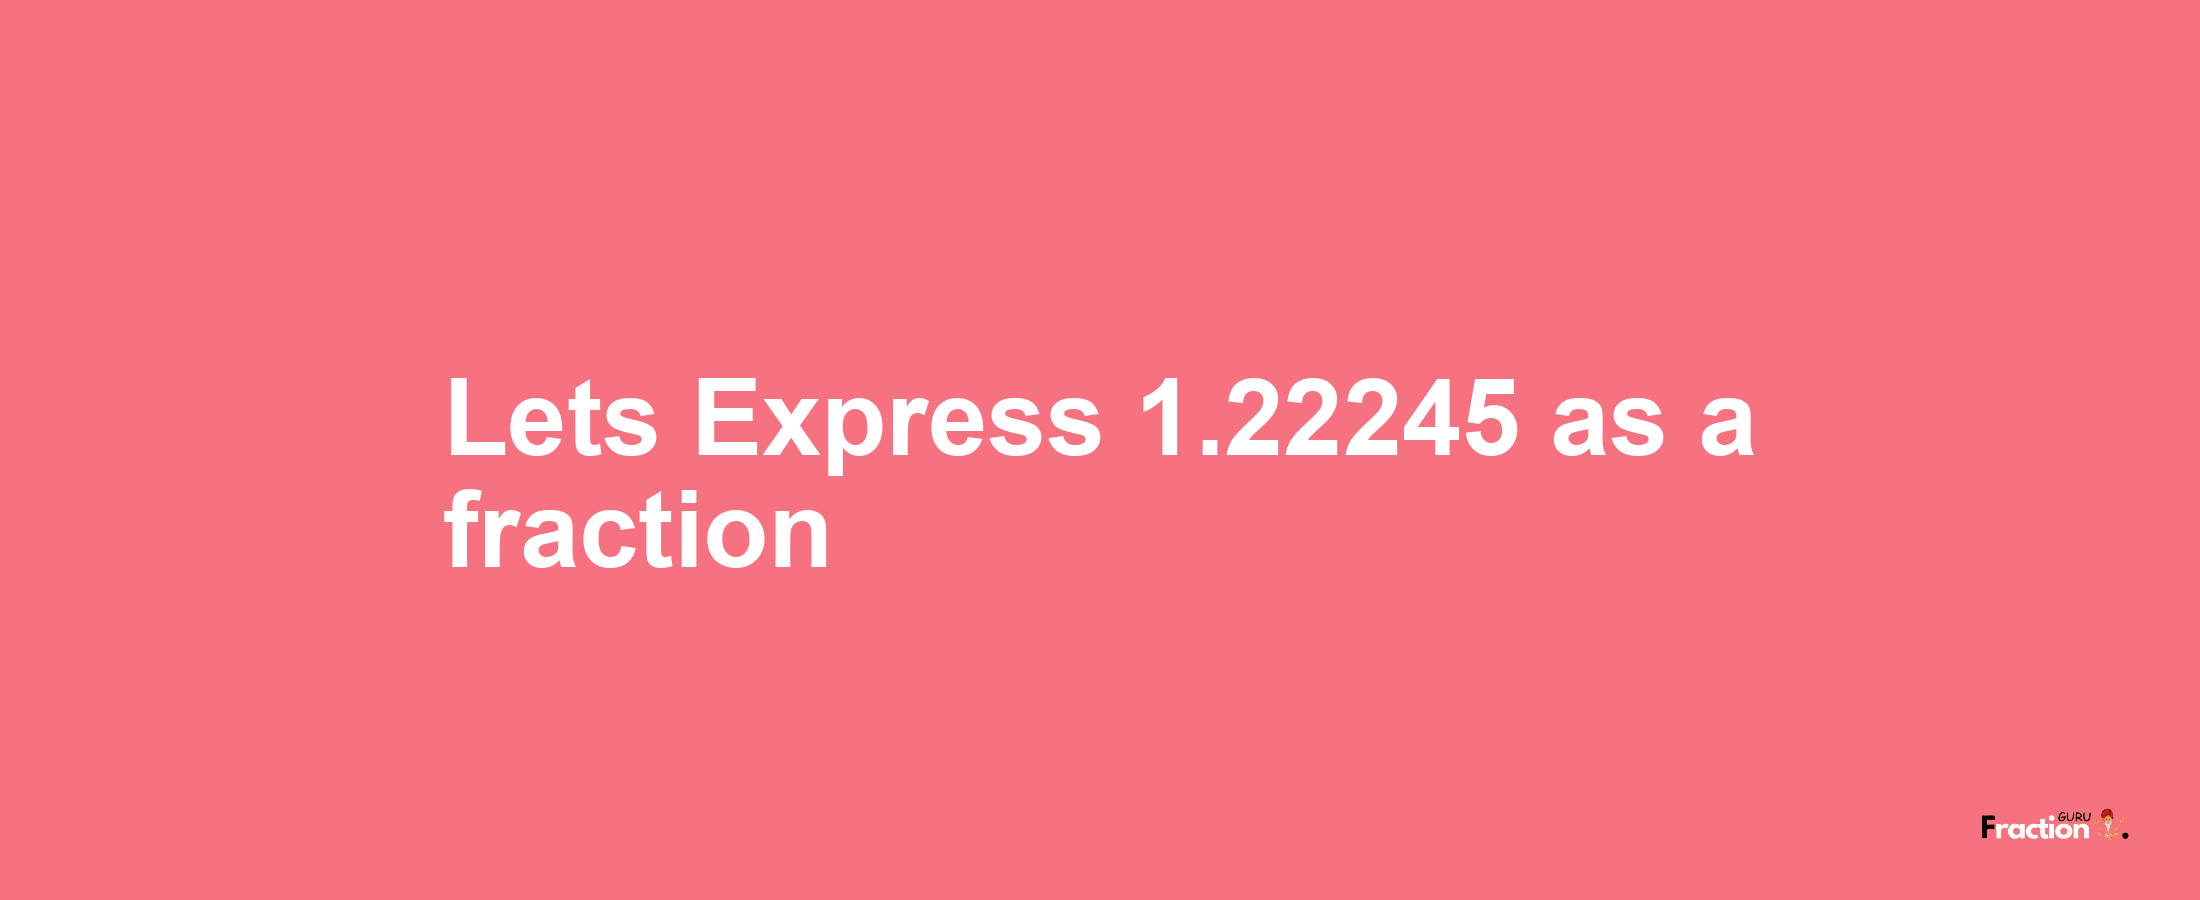 Lets Express 1.22245 as afraction